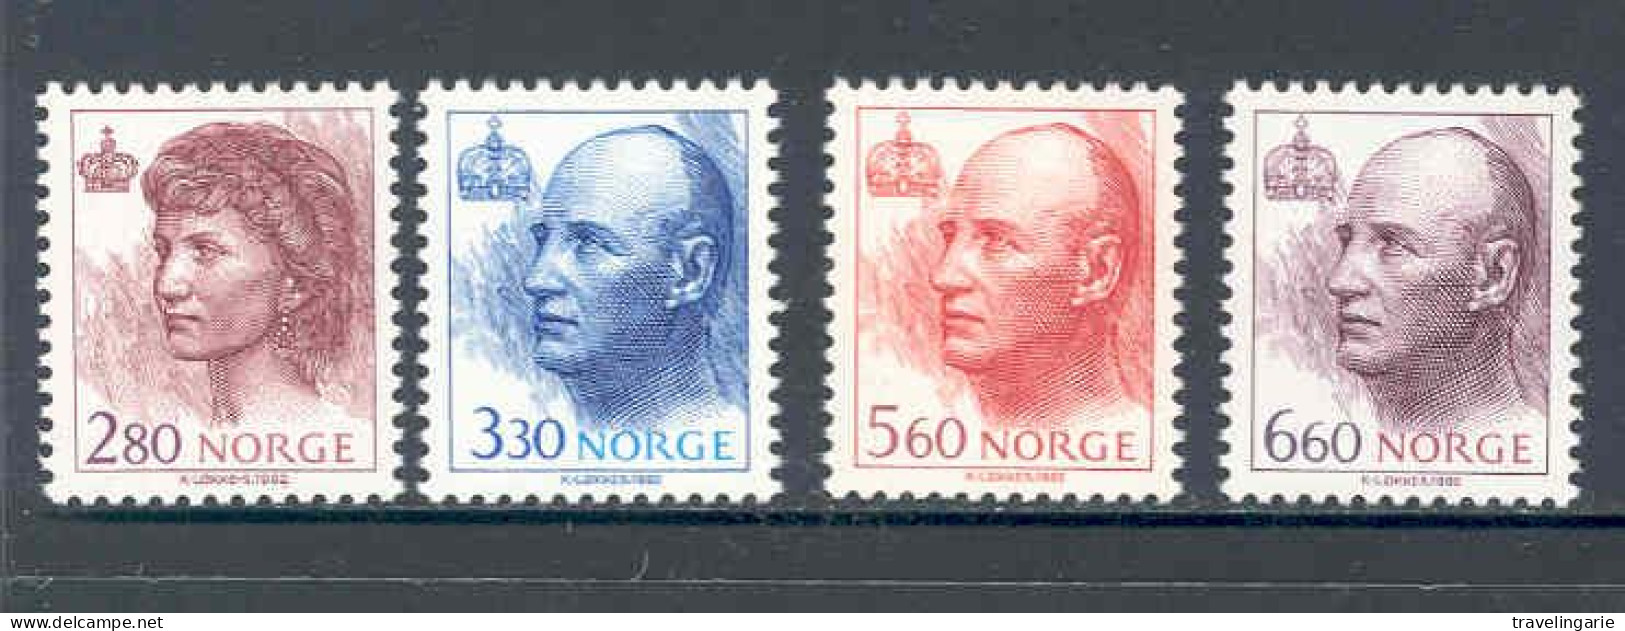 Norway 1992 King Harald V  Definitves Low Values  NH ** - Unused Stamps